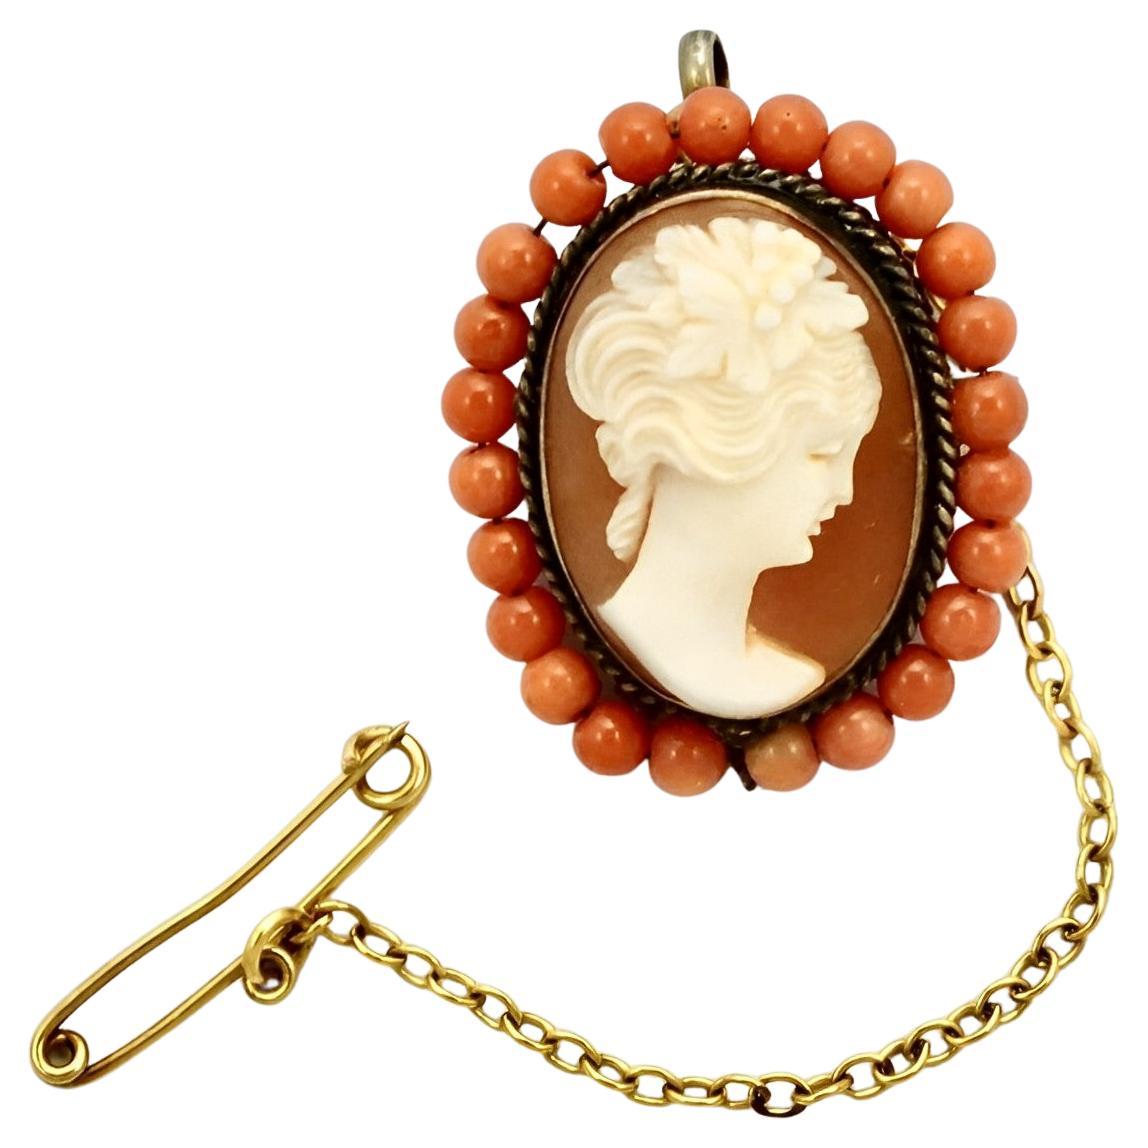 Antique Gold Plated Shell Cameo Brooch with Coral Bead Surround For Sale